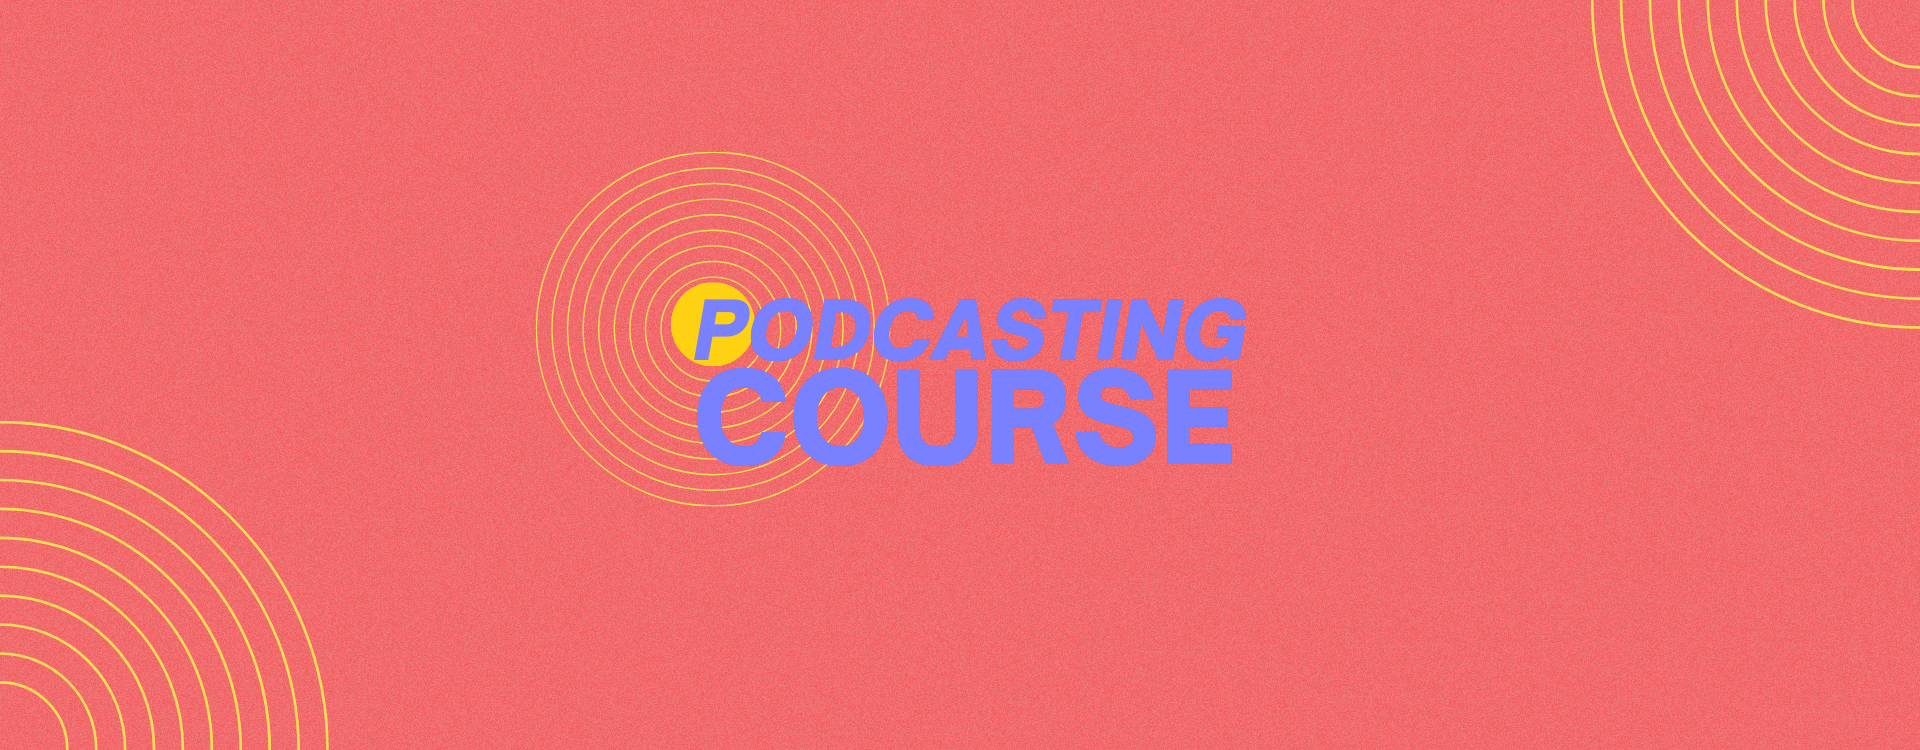 podcasting course